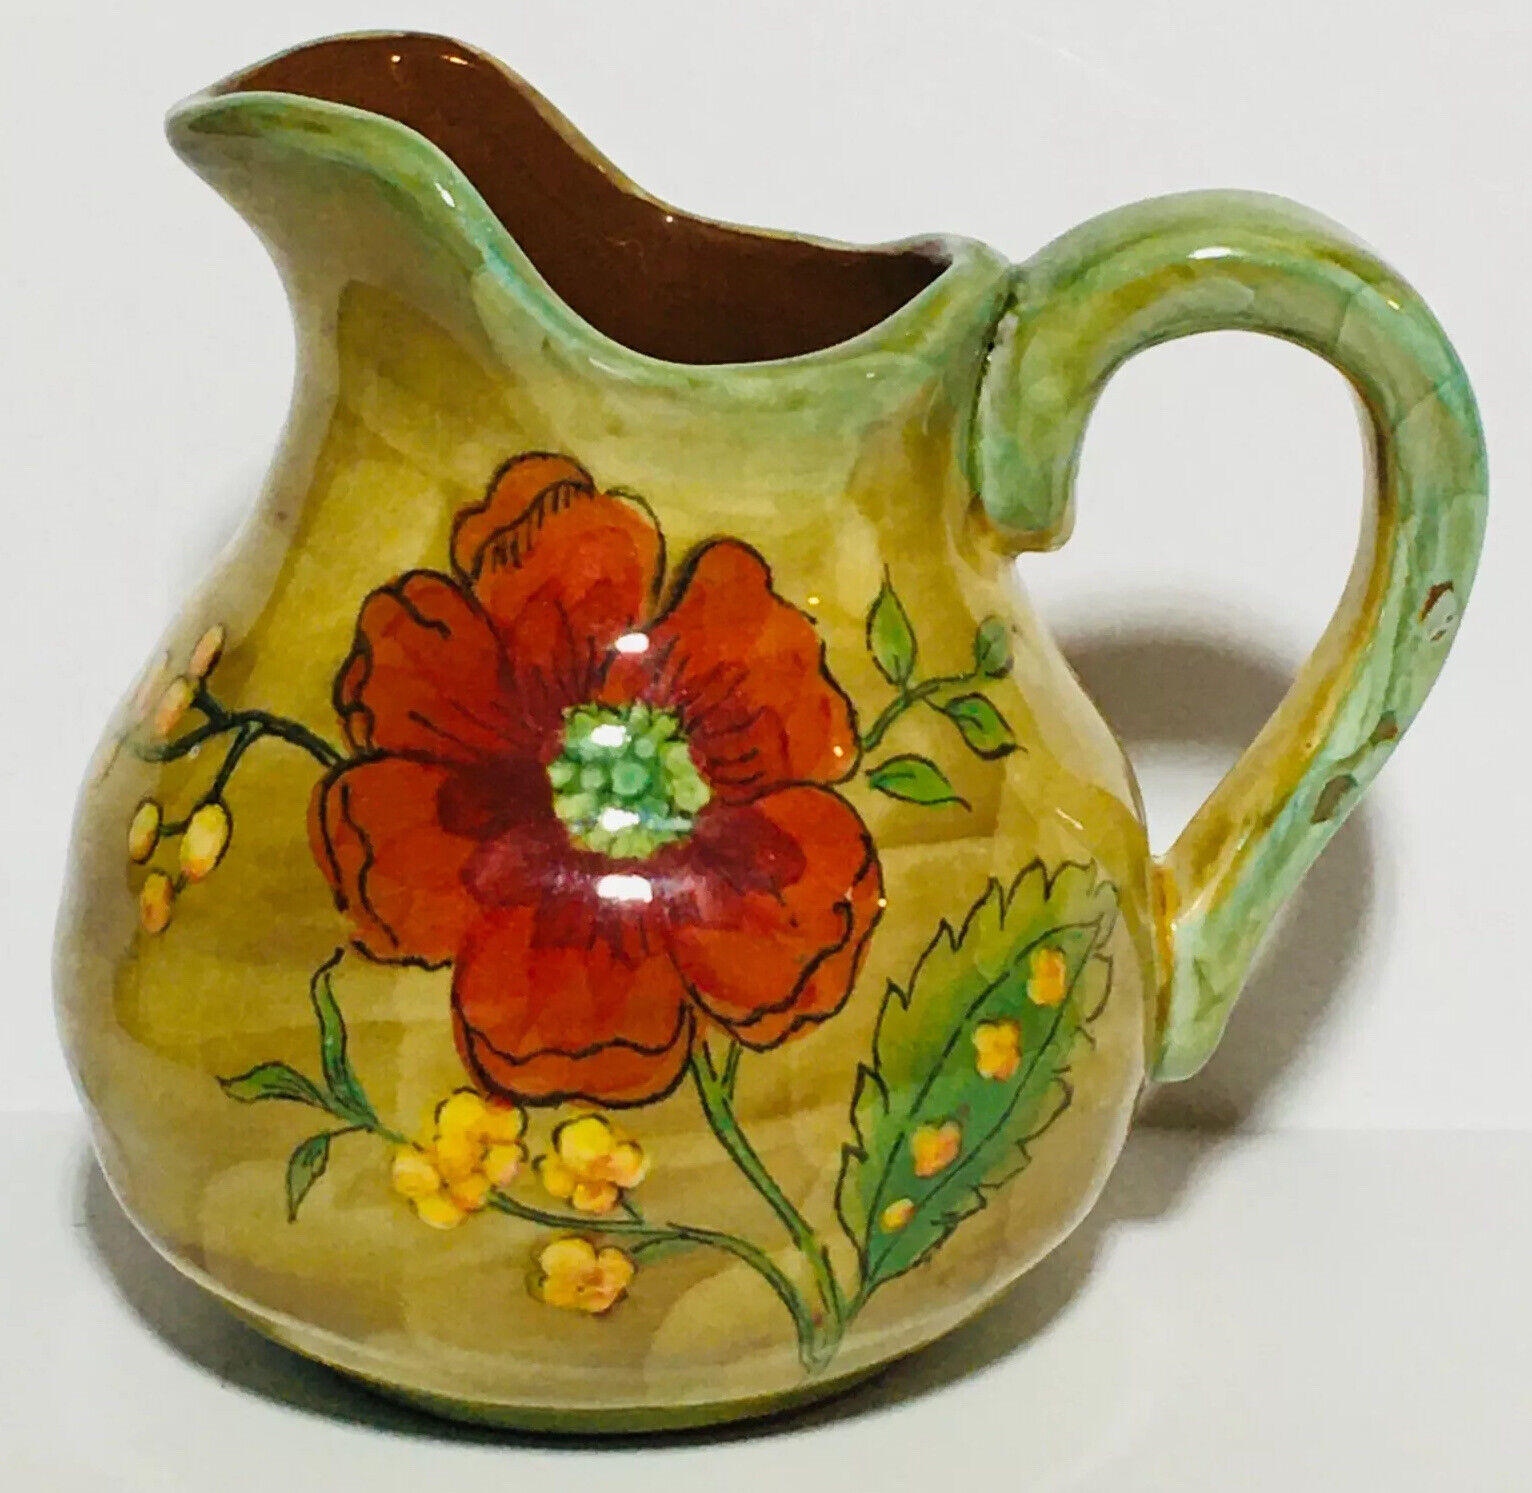 Vintage Poppy Harvest Pitcher 5” Tall really cute piece. A cute beautiful piece.